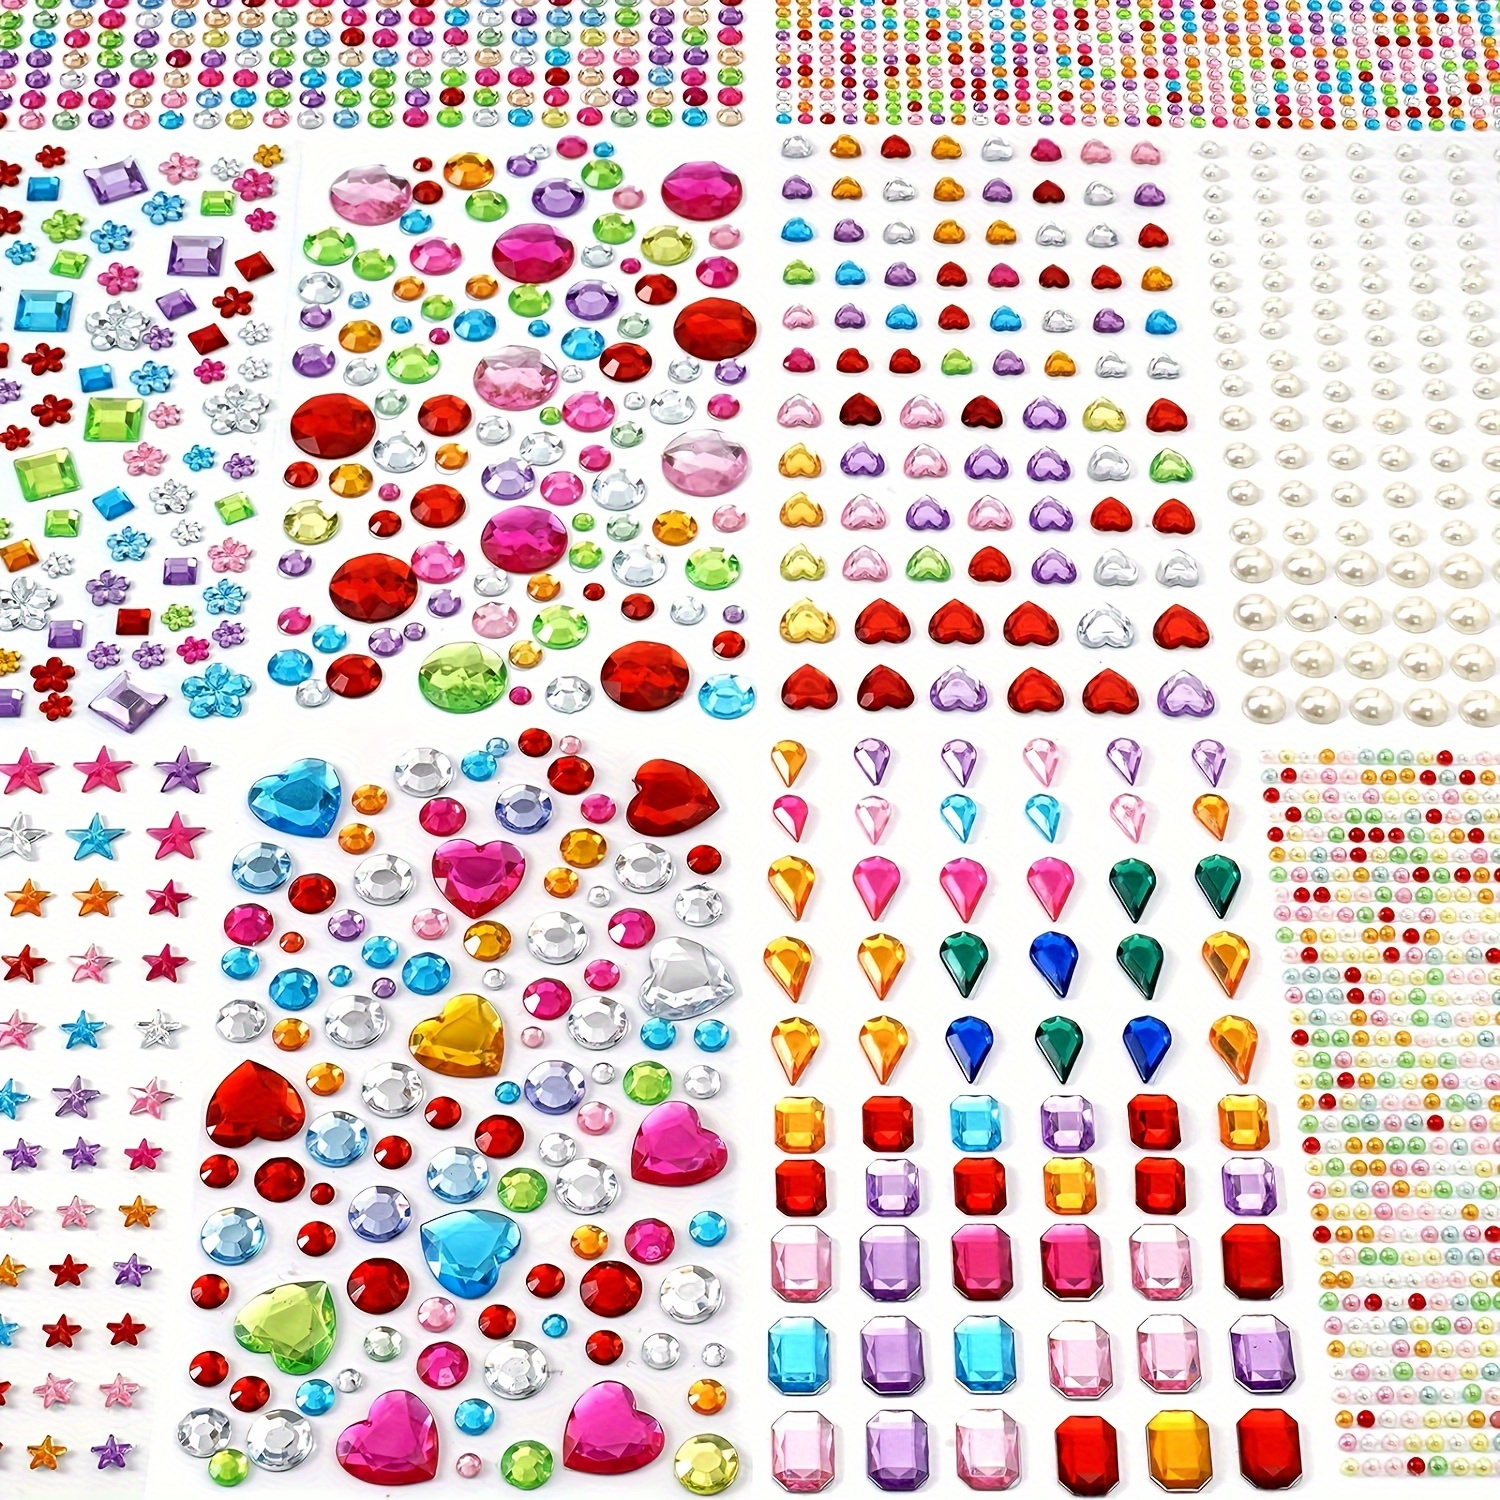 

10sheet Gem Stickers Jewels For Crafts - Self Adhesive Rhinestone Jewel Stickers 2774pcs Acrylic Bling Heart Valentine's Day Stickers Face Gems Glitters Diy Makeup For Music Festival